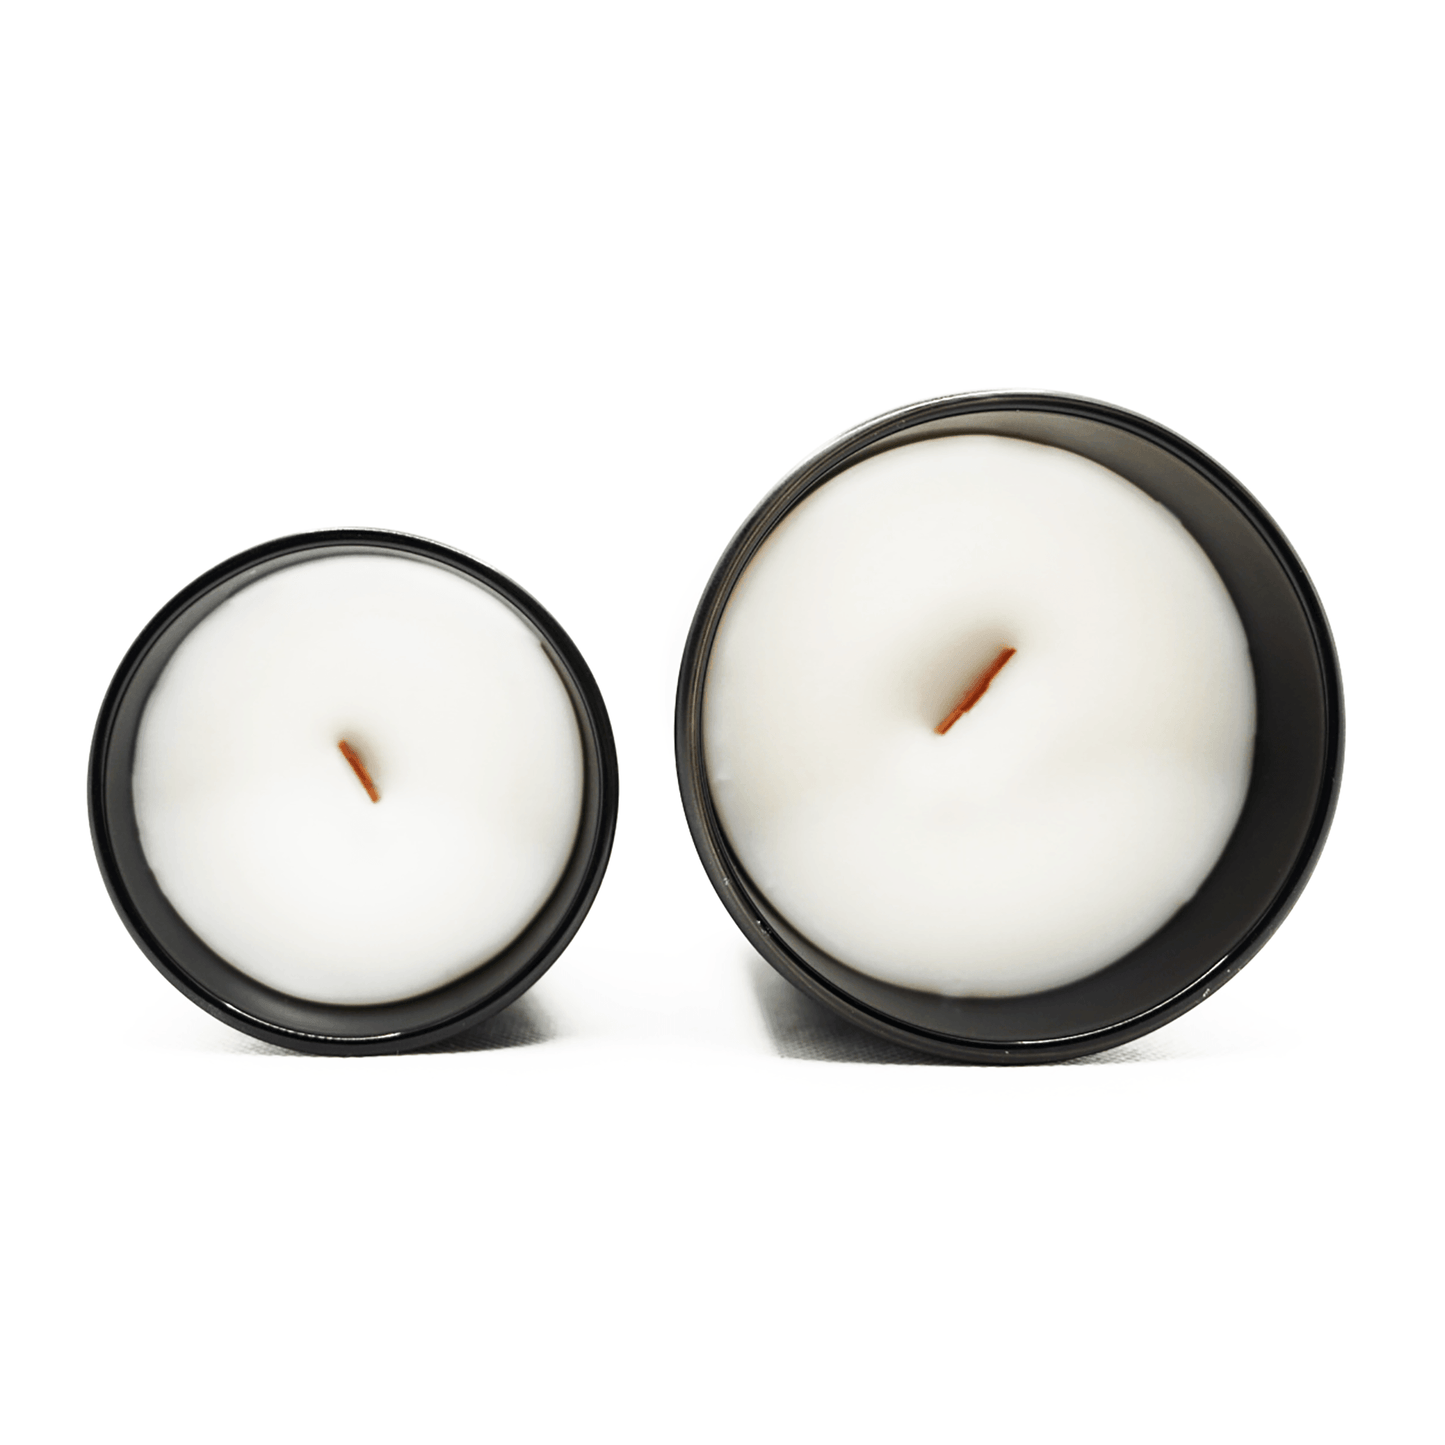 This Is Your Sign To…69 - Woodwick Candle - BADWAX